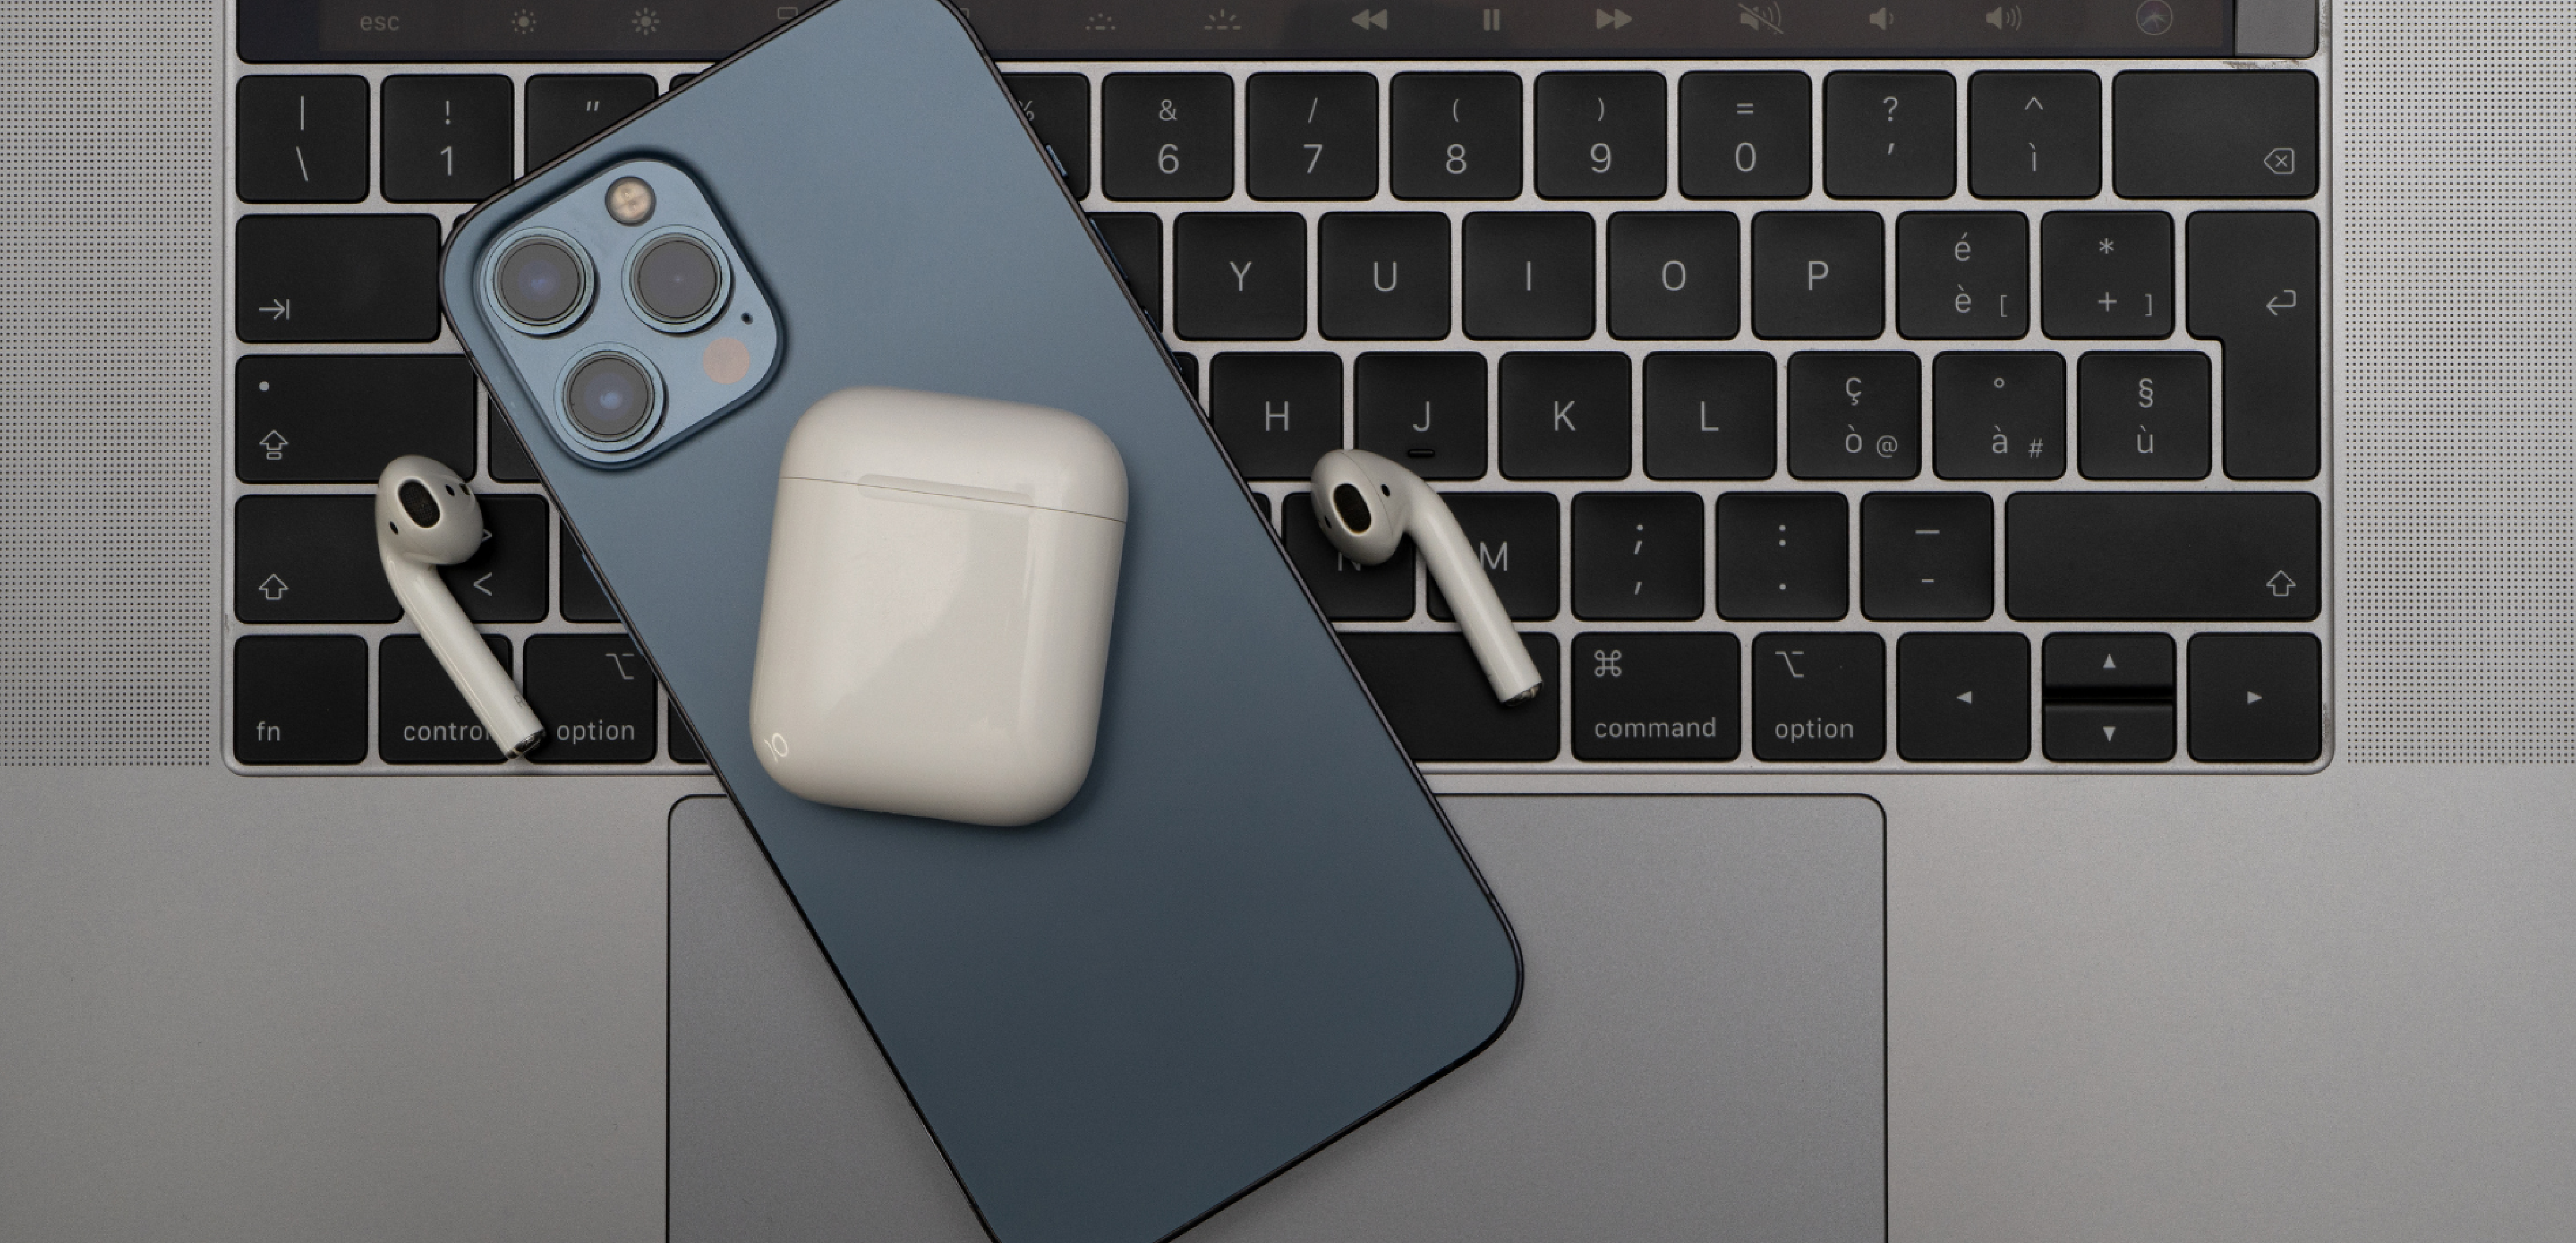 Photo of a grey MacBook keyboard with a navy blue iPhone and AirPods resting on top of it